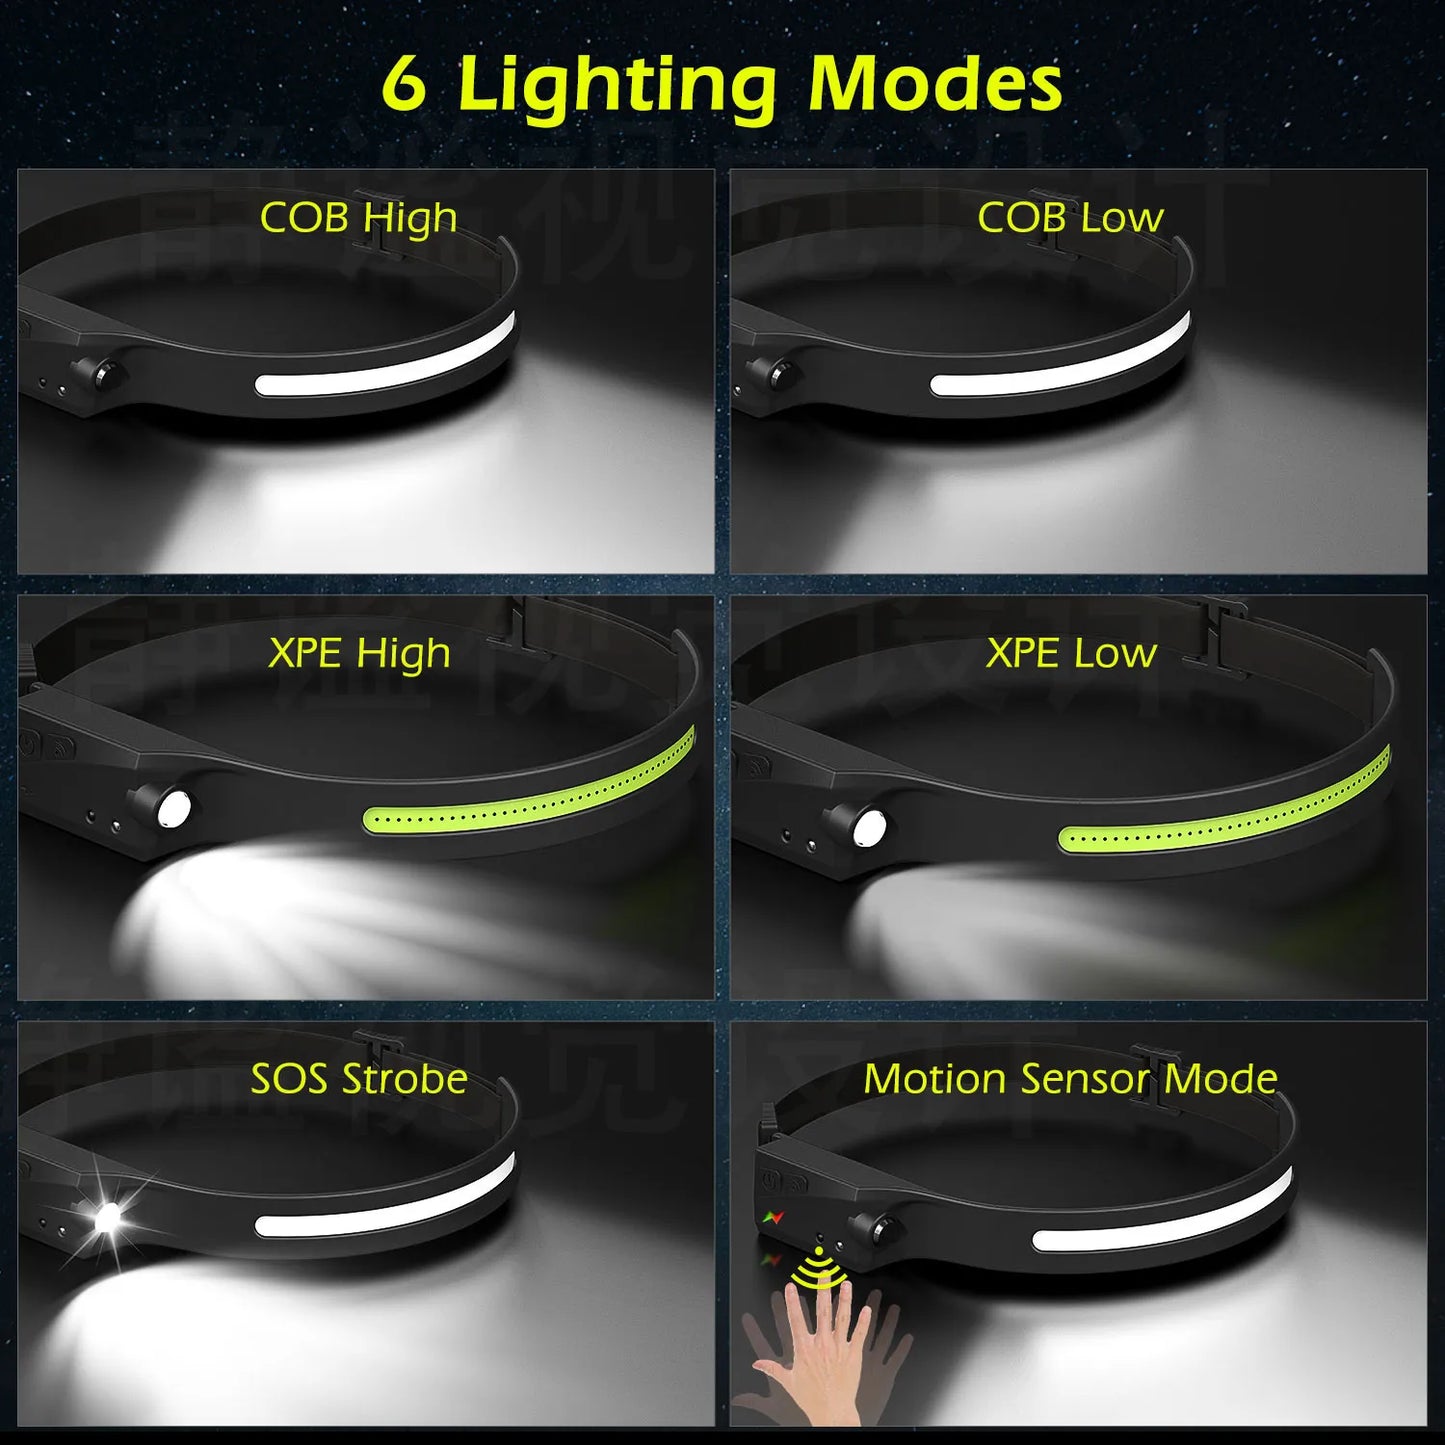 Advanced USB Rechargeable LED Sensor Headlamp: Ultimate Lighting for Outdoor Adventures & Home Projects